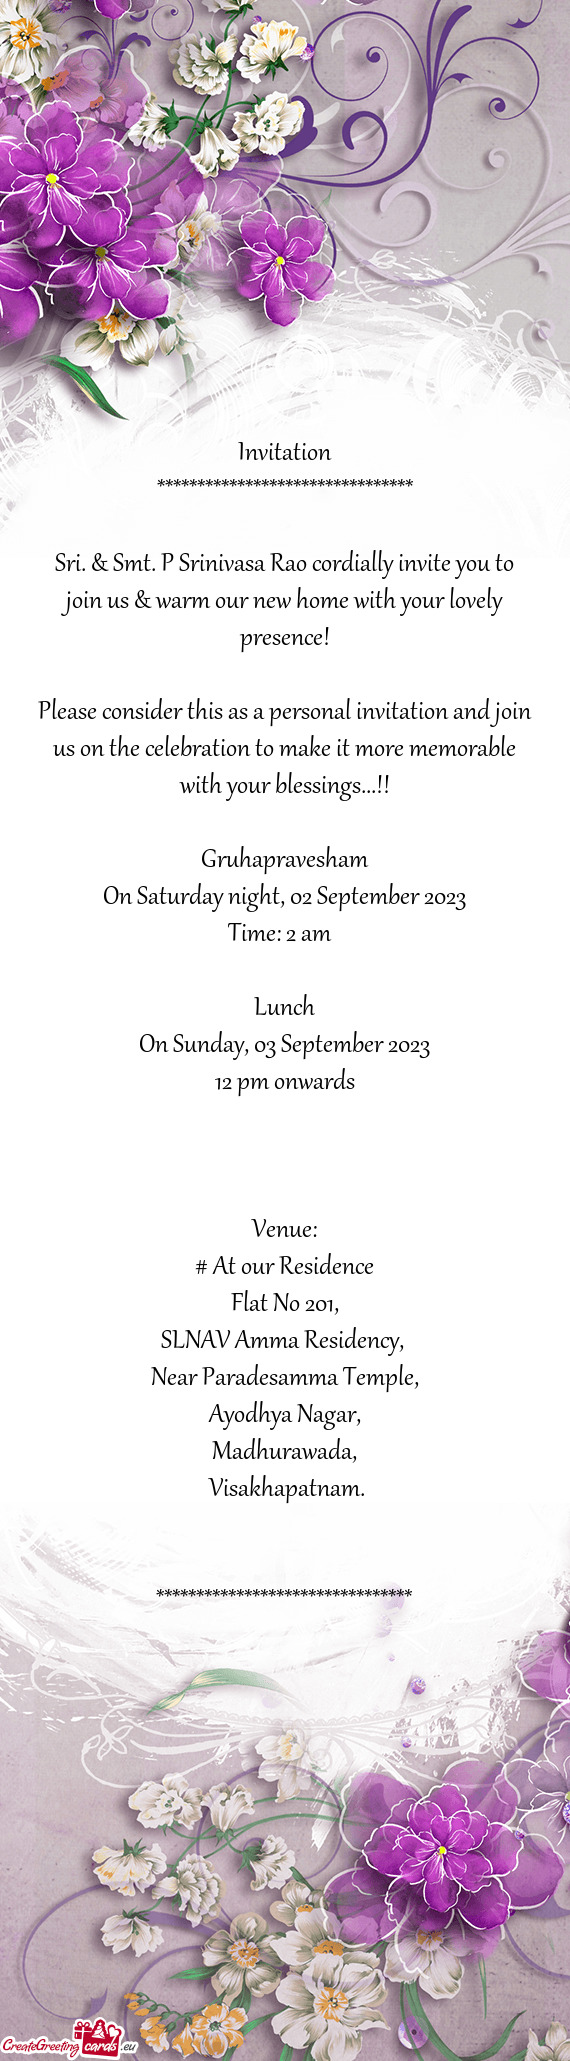 Sri. & Smt. P Srinivasa Rao cordially invite you to join us & warm our new home with your lovely pre